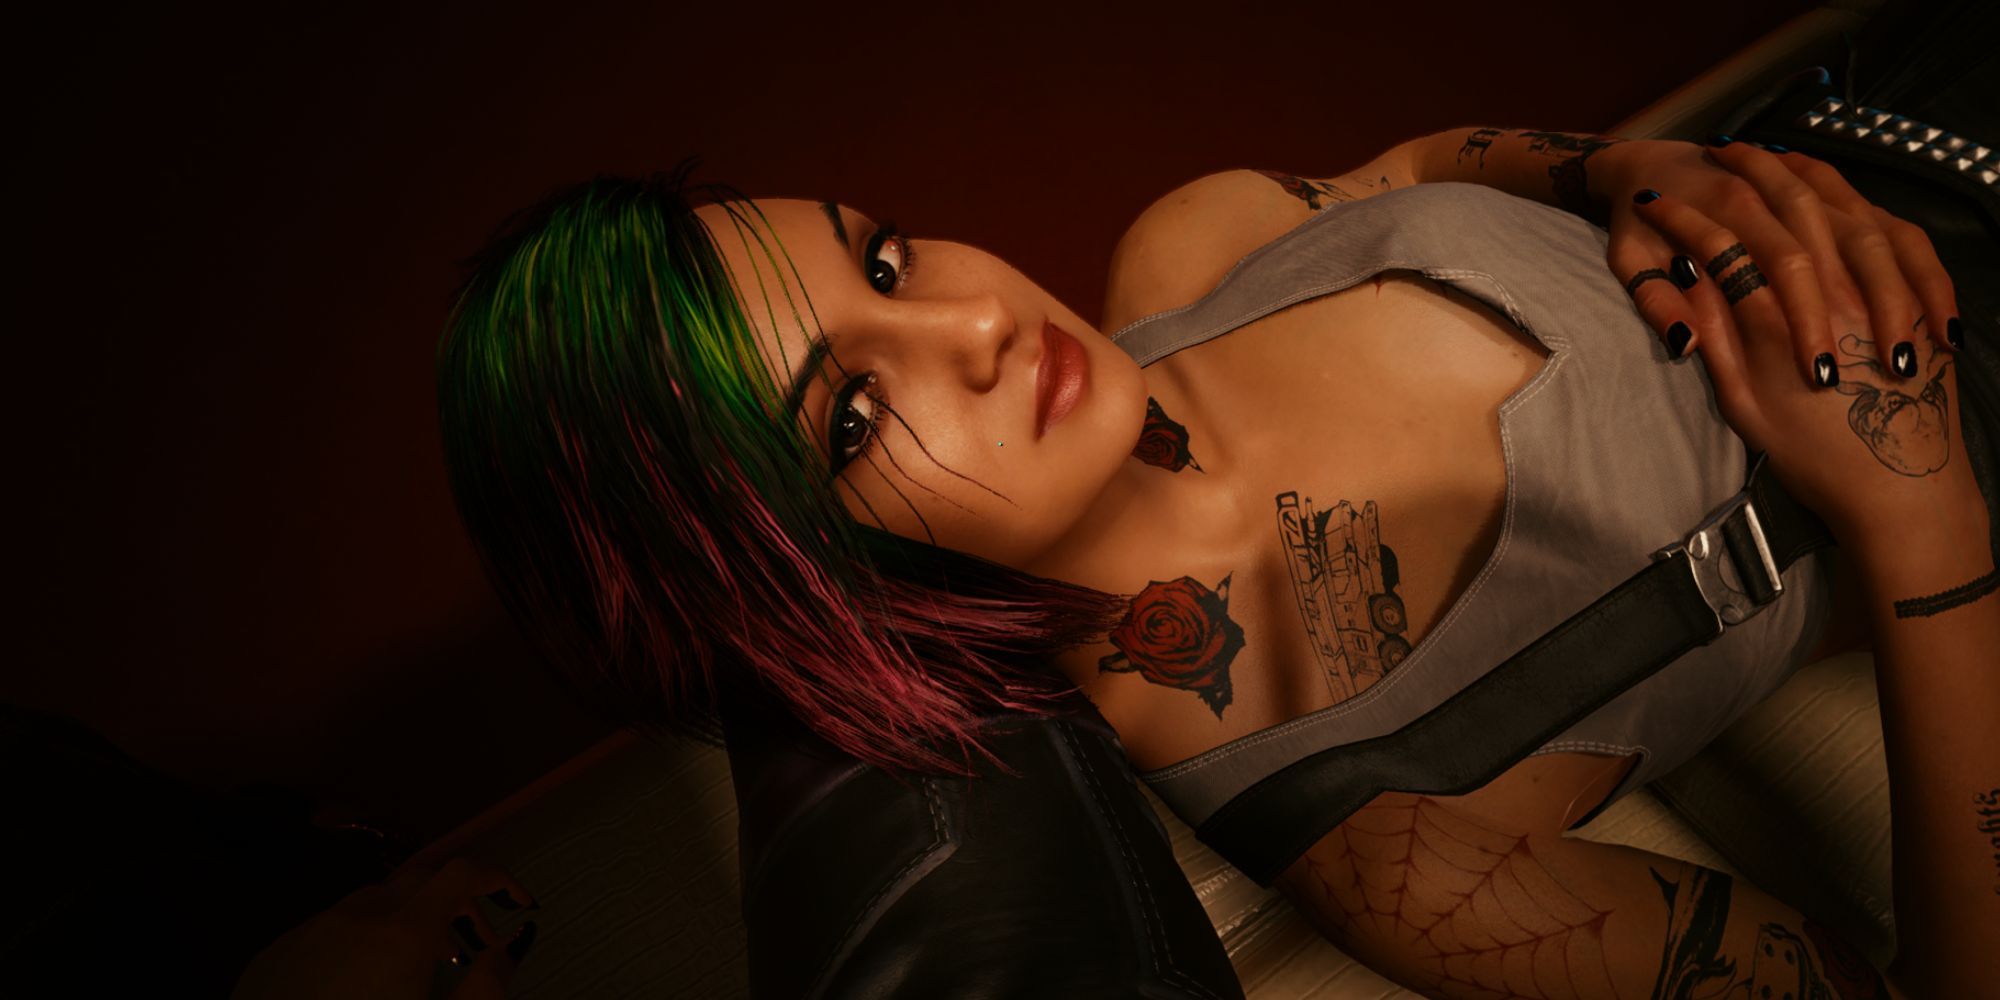 Judy from Cyberpunk 2077 lying on the player character's lap, looking up at them